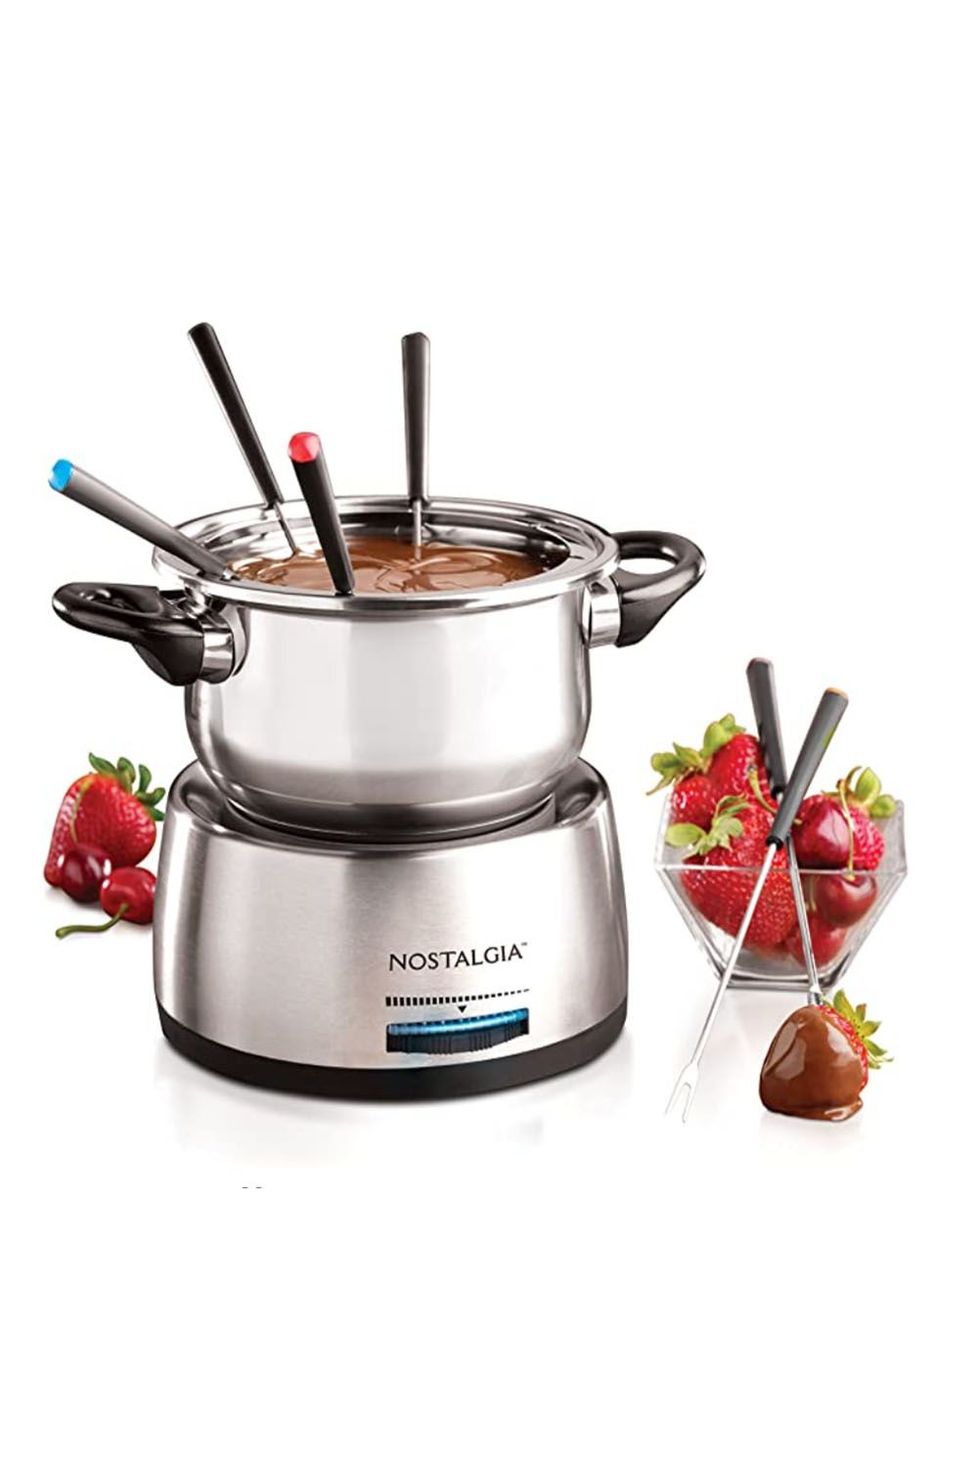 Nostalgia 6-Cup Stainless Steel Electric Fondue Pot 